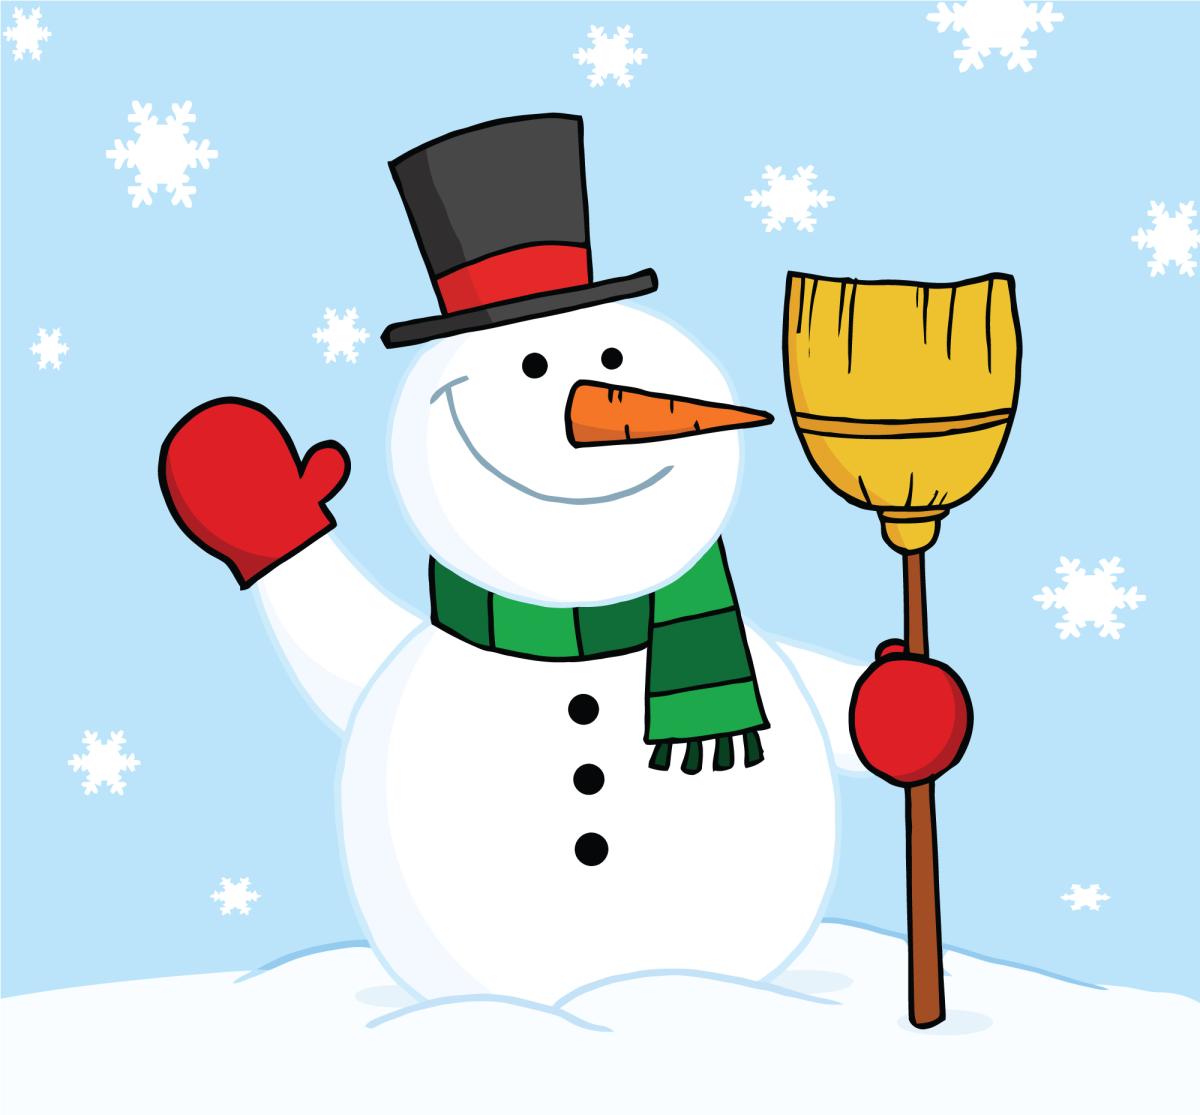 Snowman with a broom.